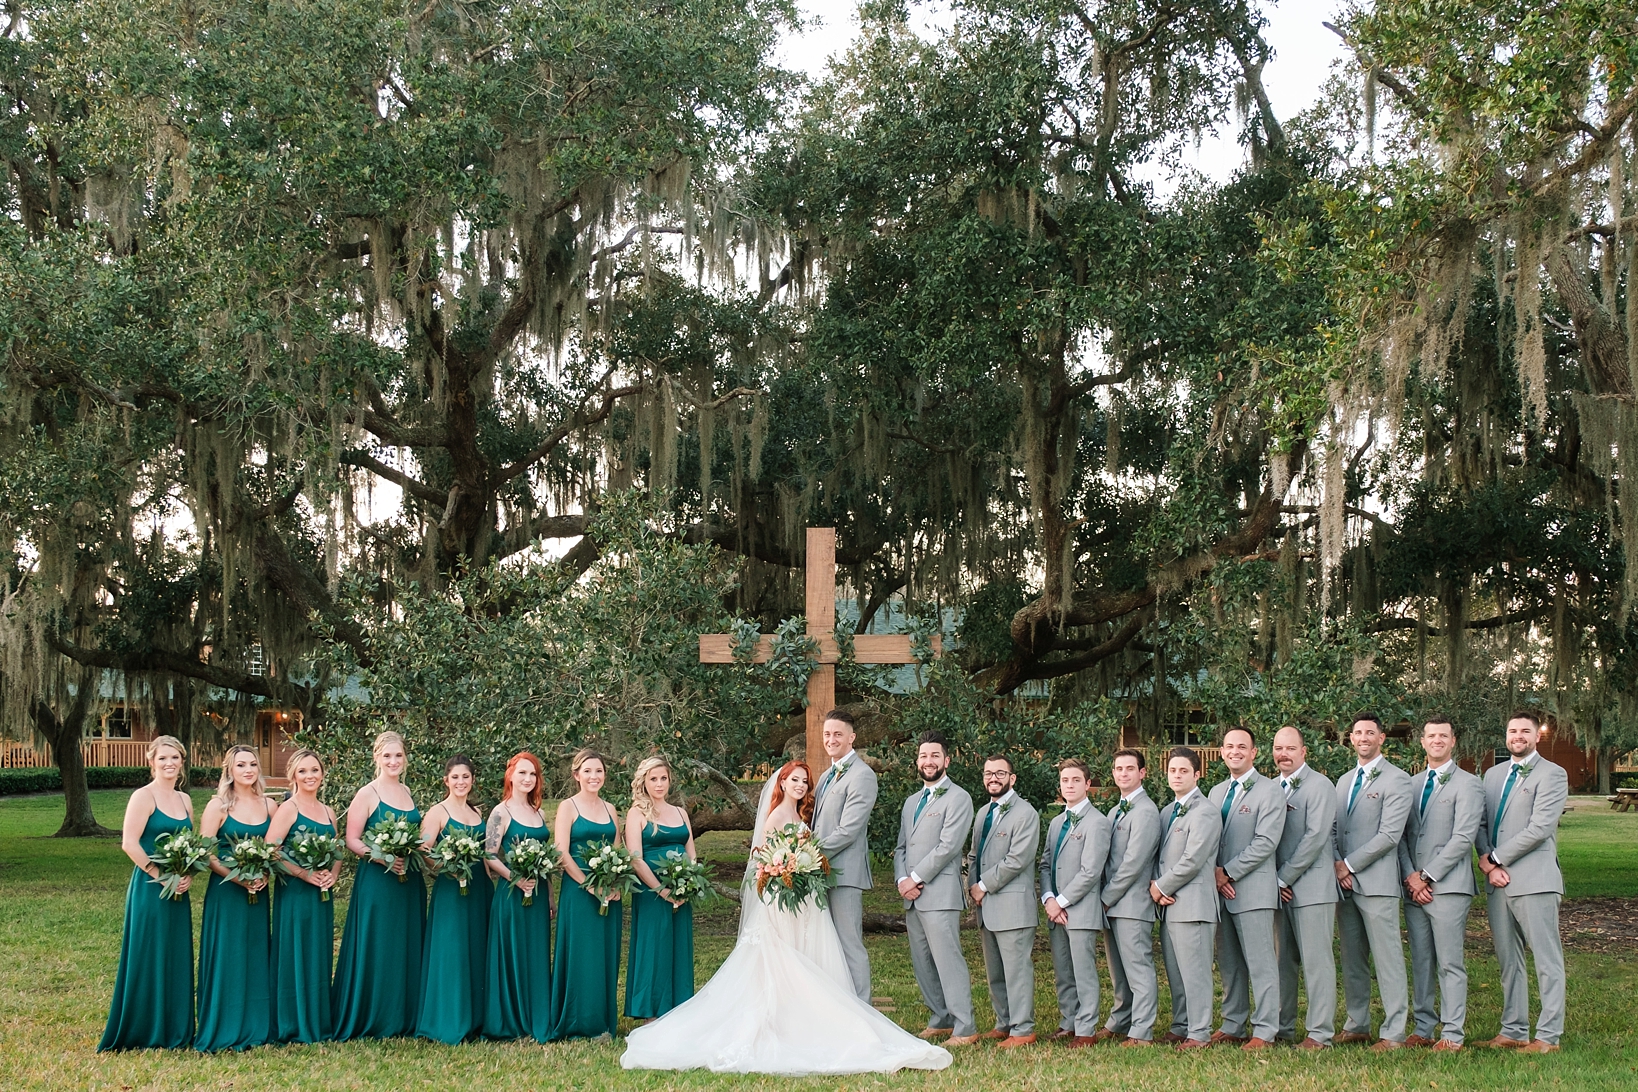 Formal Bridal Portrait of the entire wedding party under the oaks of the Ranch